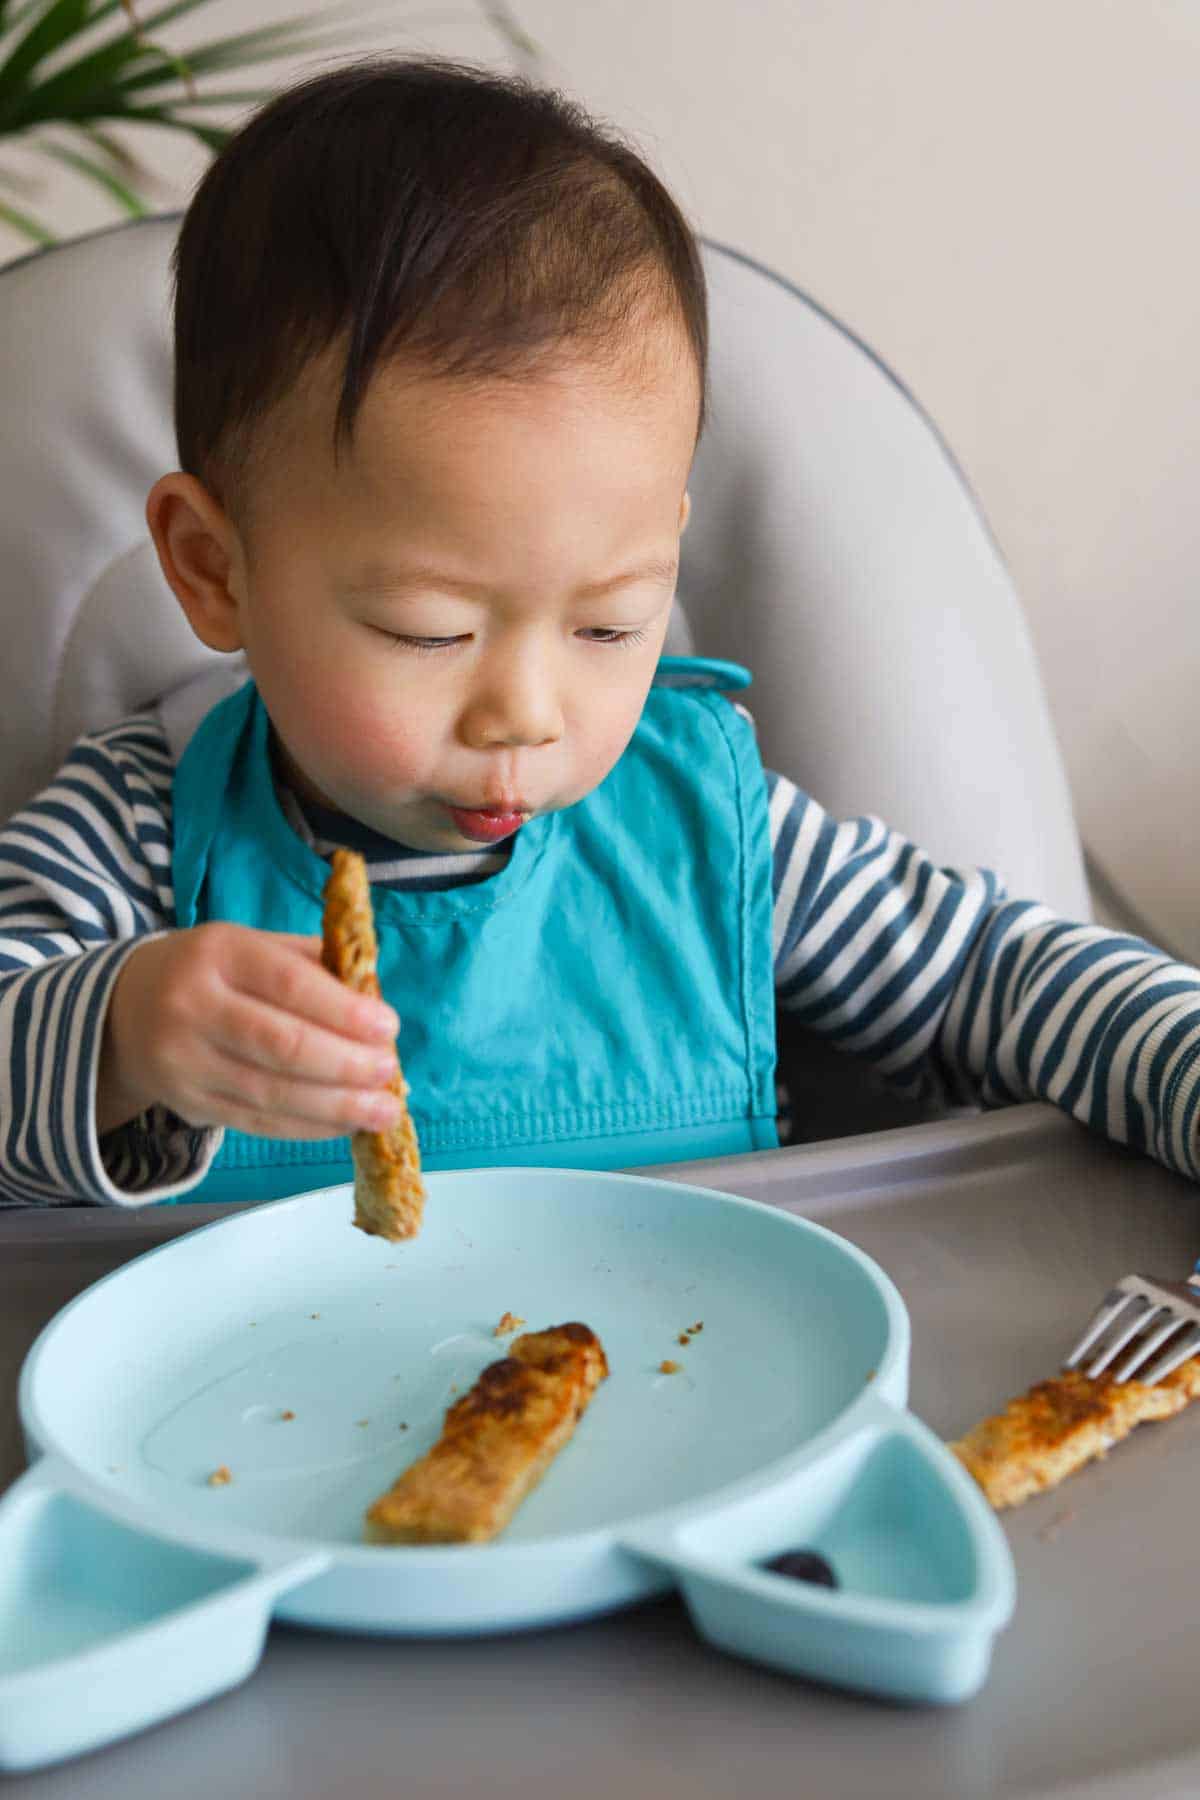 Baby eating sliced piece of bread with fork in hand.